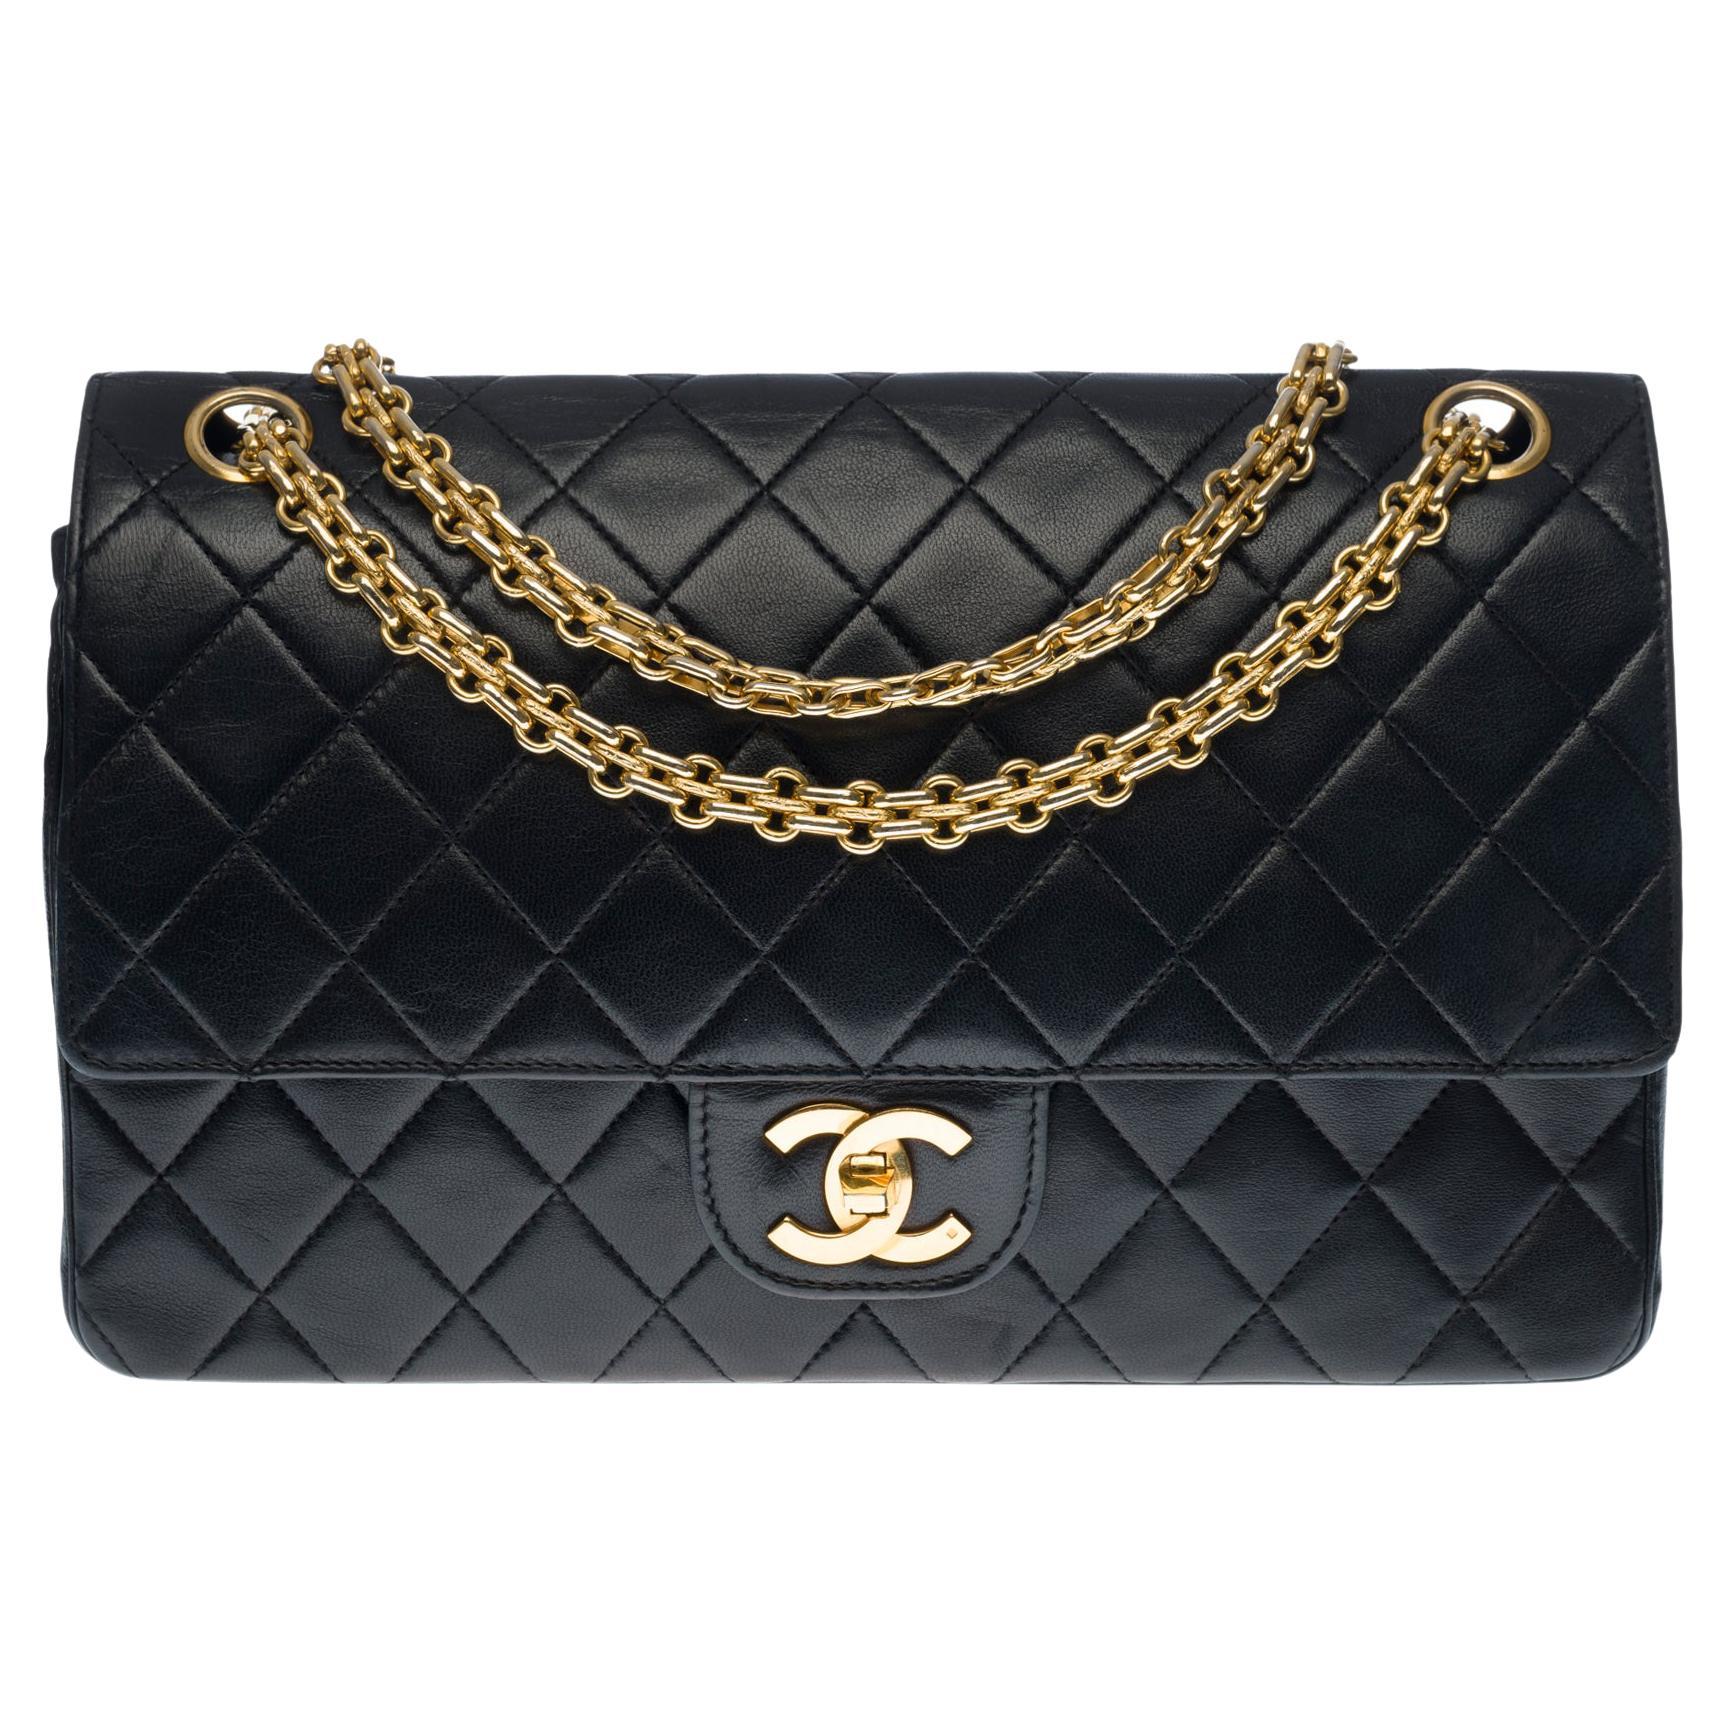 Chanel Timeless 23 cm double flap shoulder bag in beige quilted